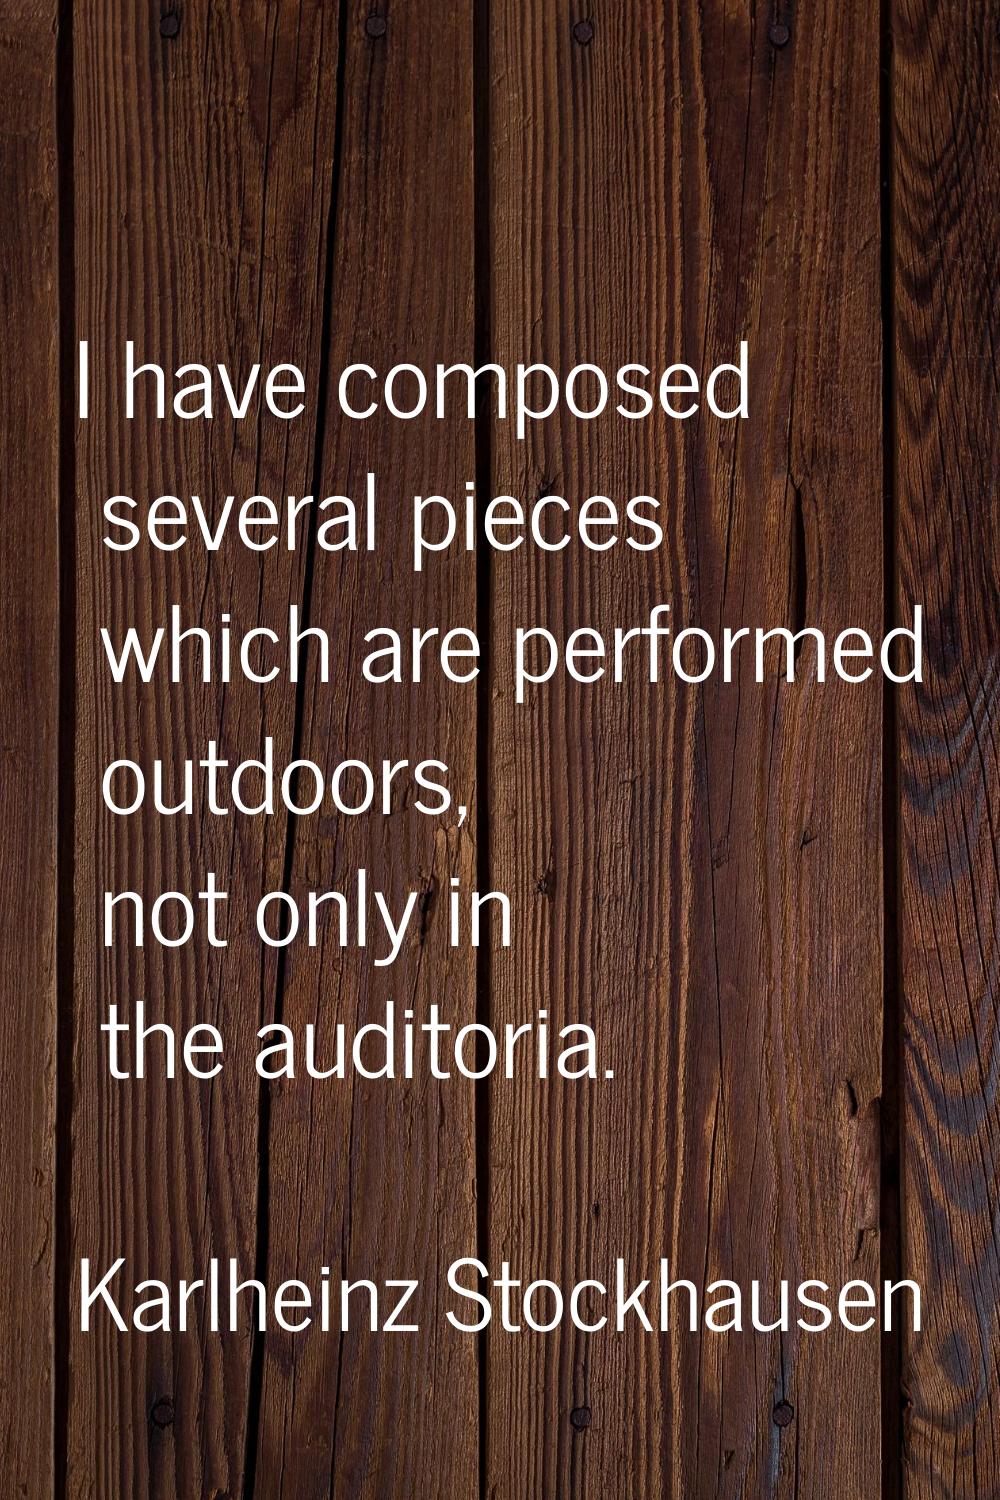 I have composed several pieces which are performed outdoors, not only in the auditoria.